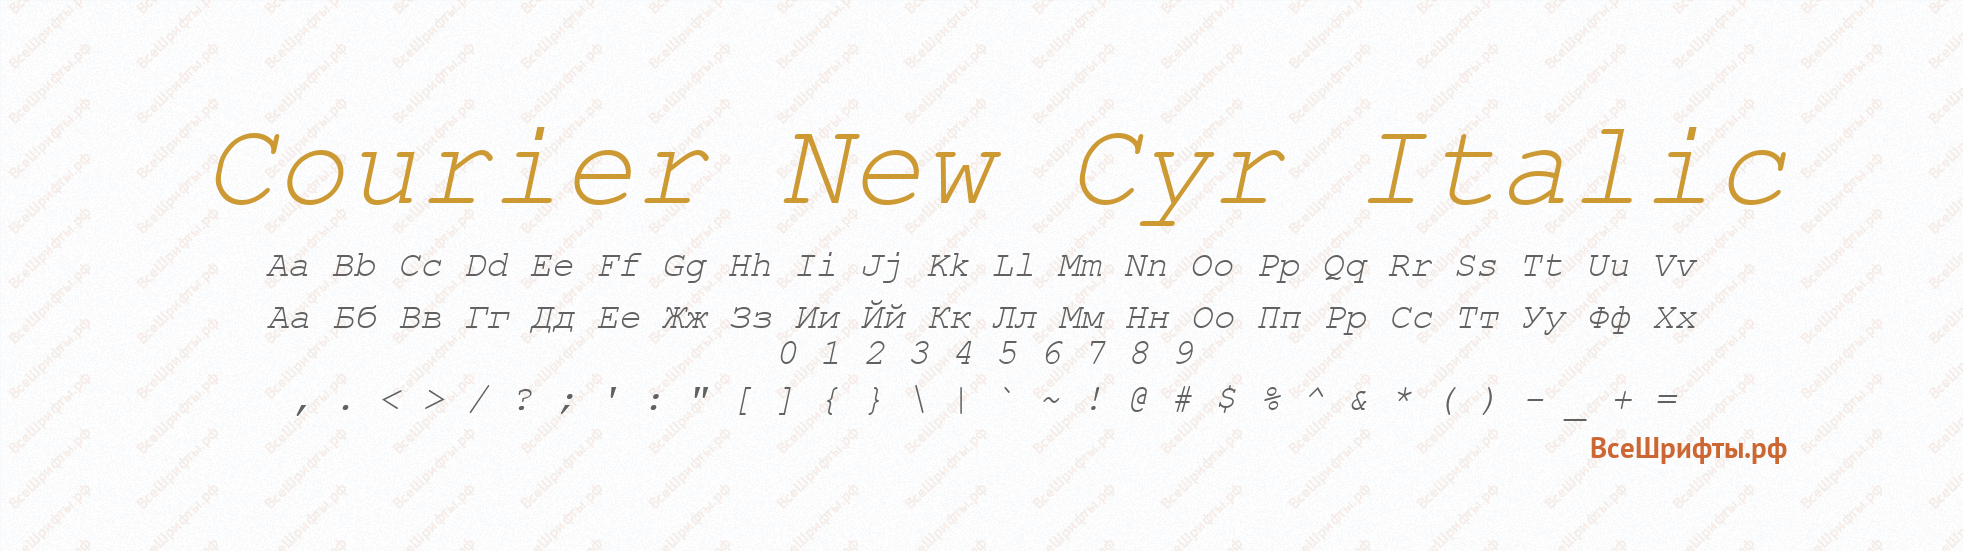 Шрифт Courier New Cyr Italic